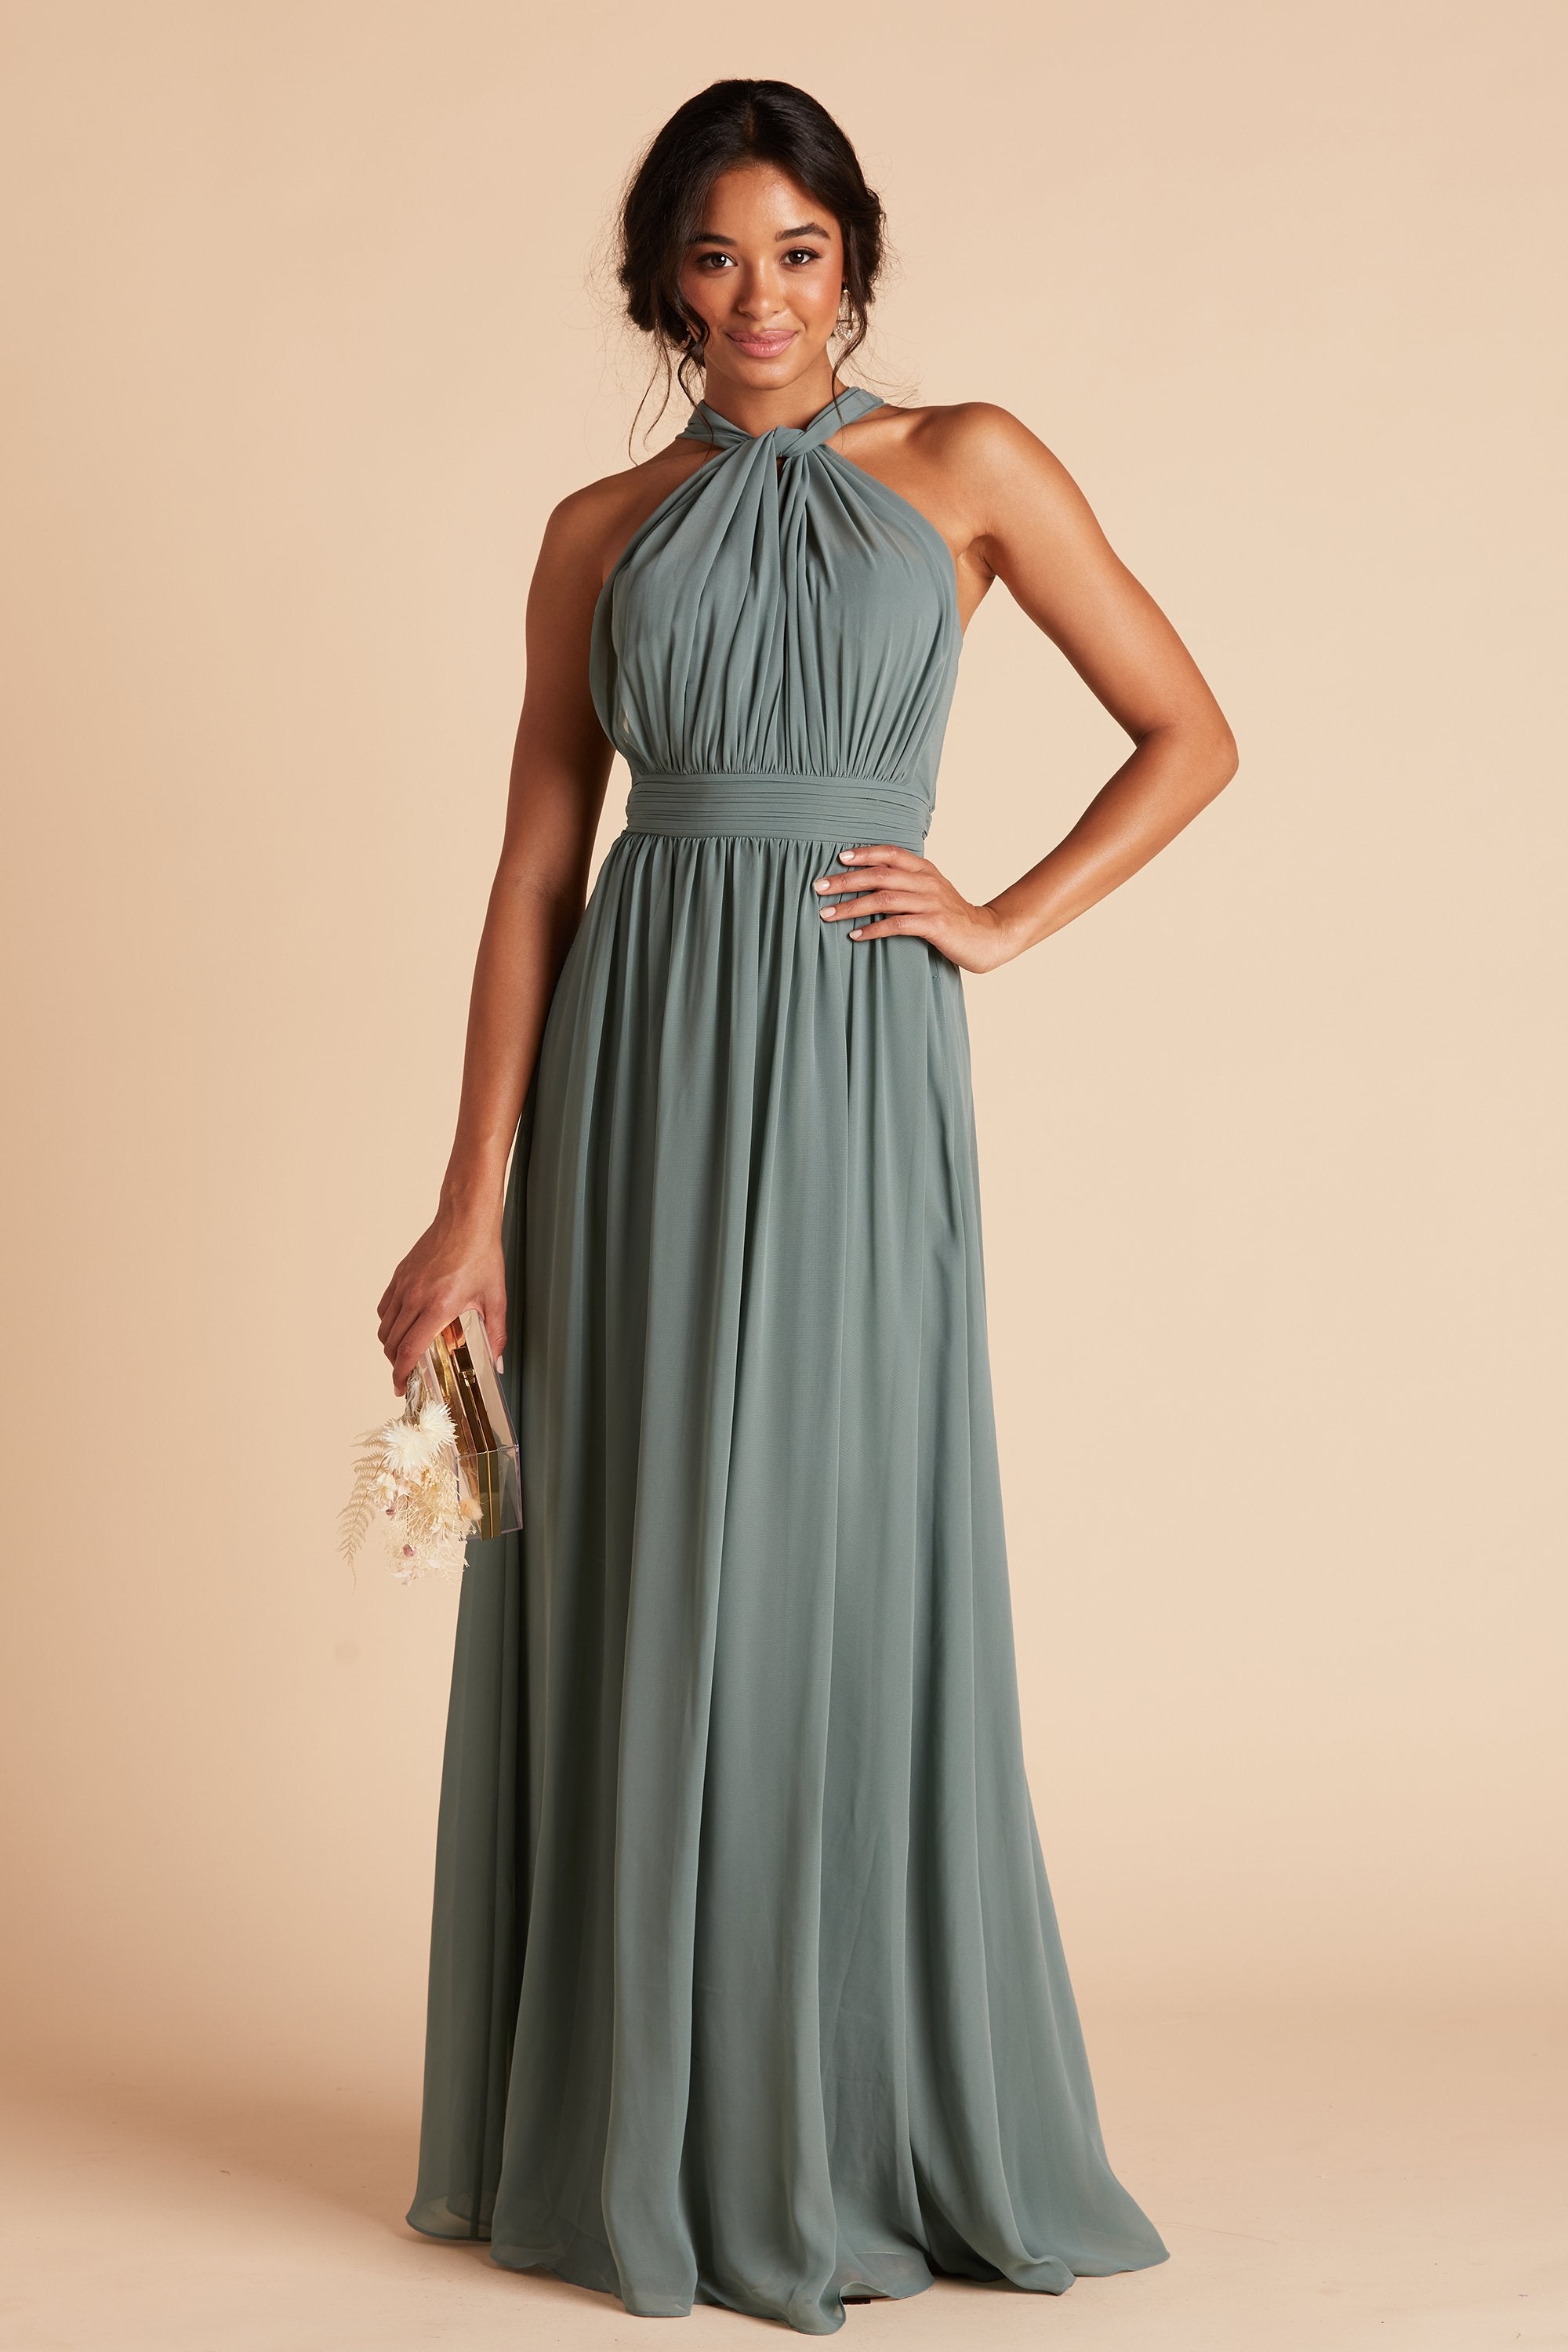 Front view of the Grace Convertible Dress in sea glass chiffon with the streamers pulled over the bust and tied at the neck, then pulled toward the back, creating a choker neck halter appearance.